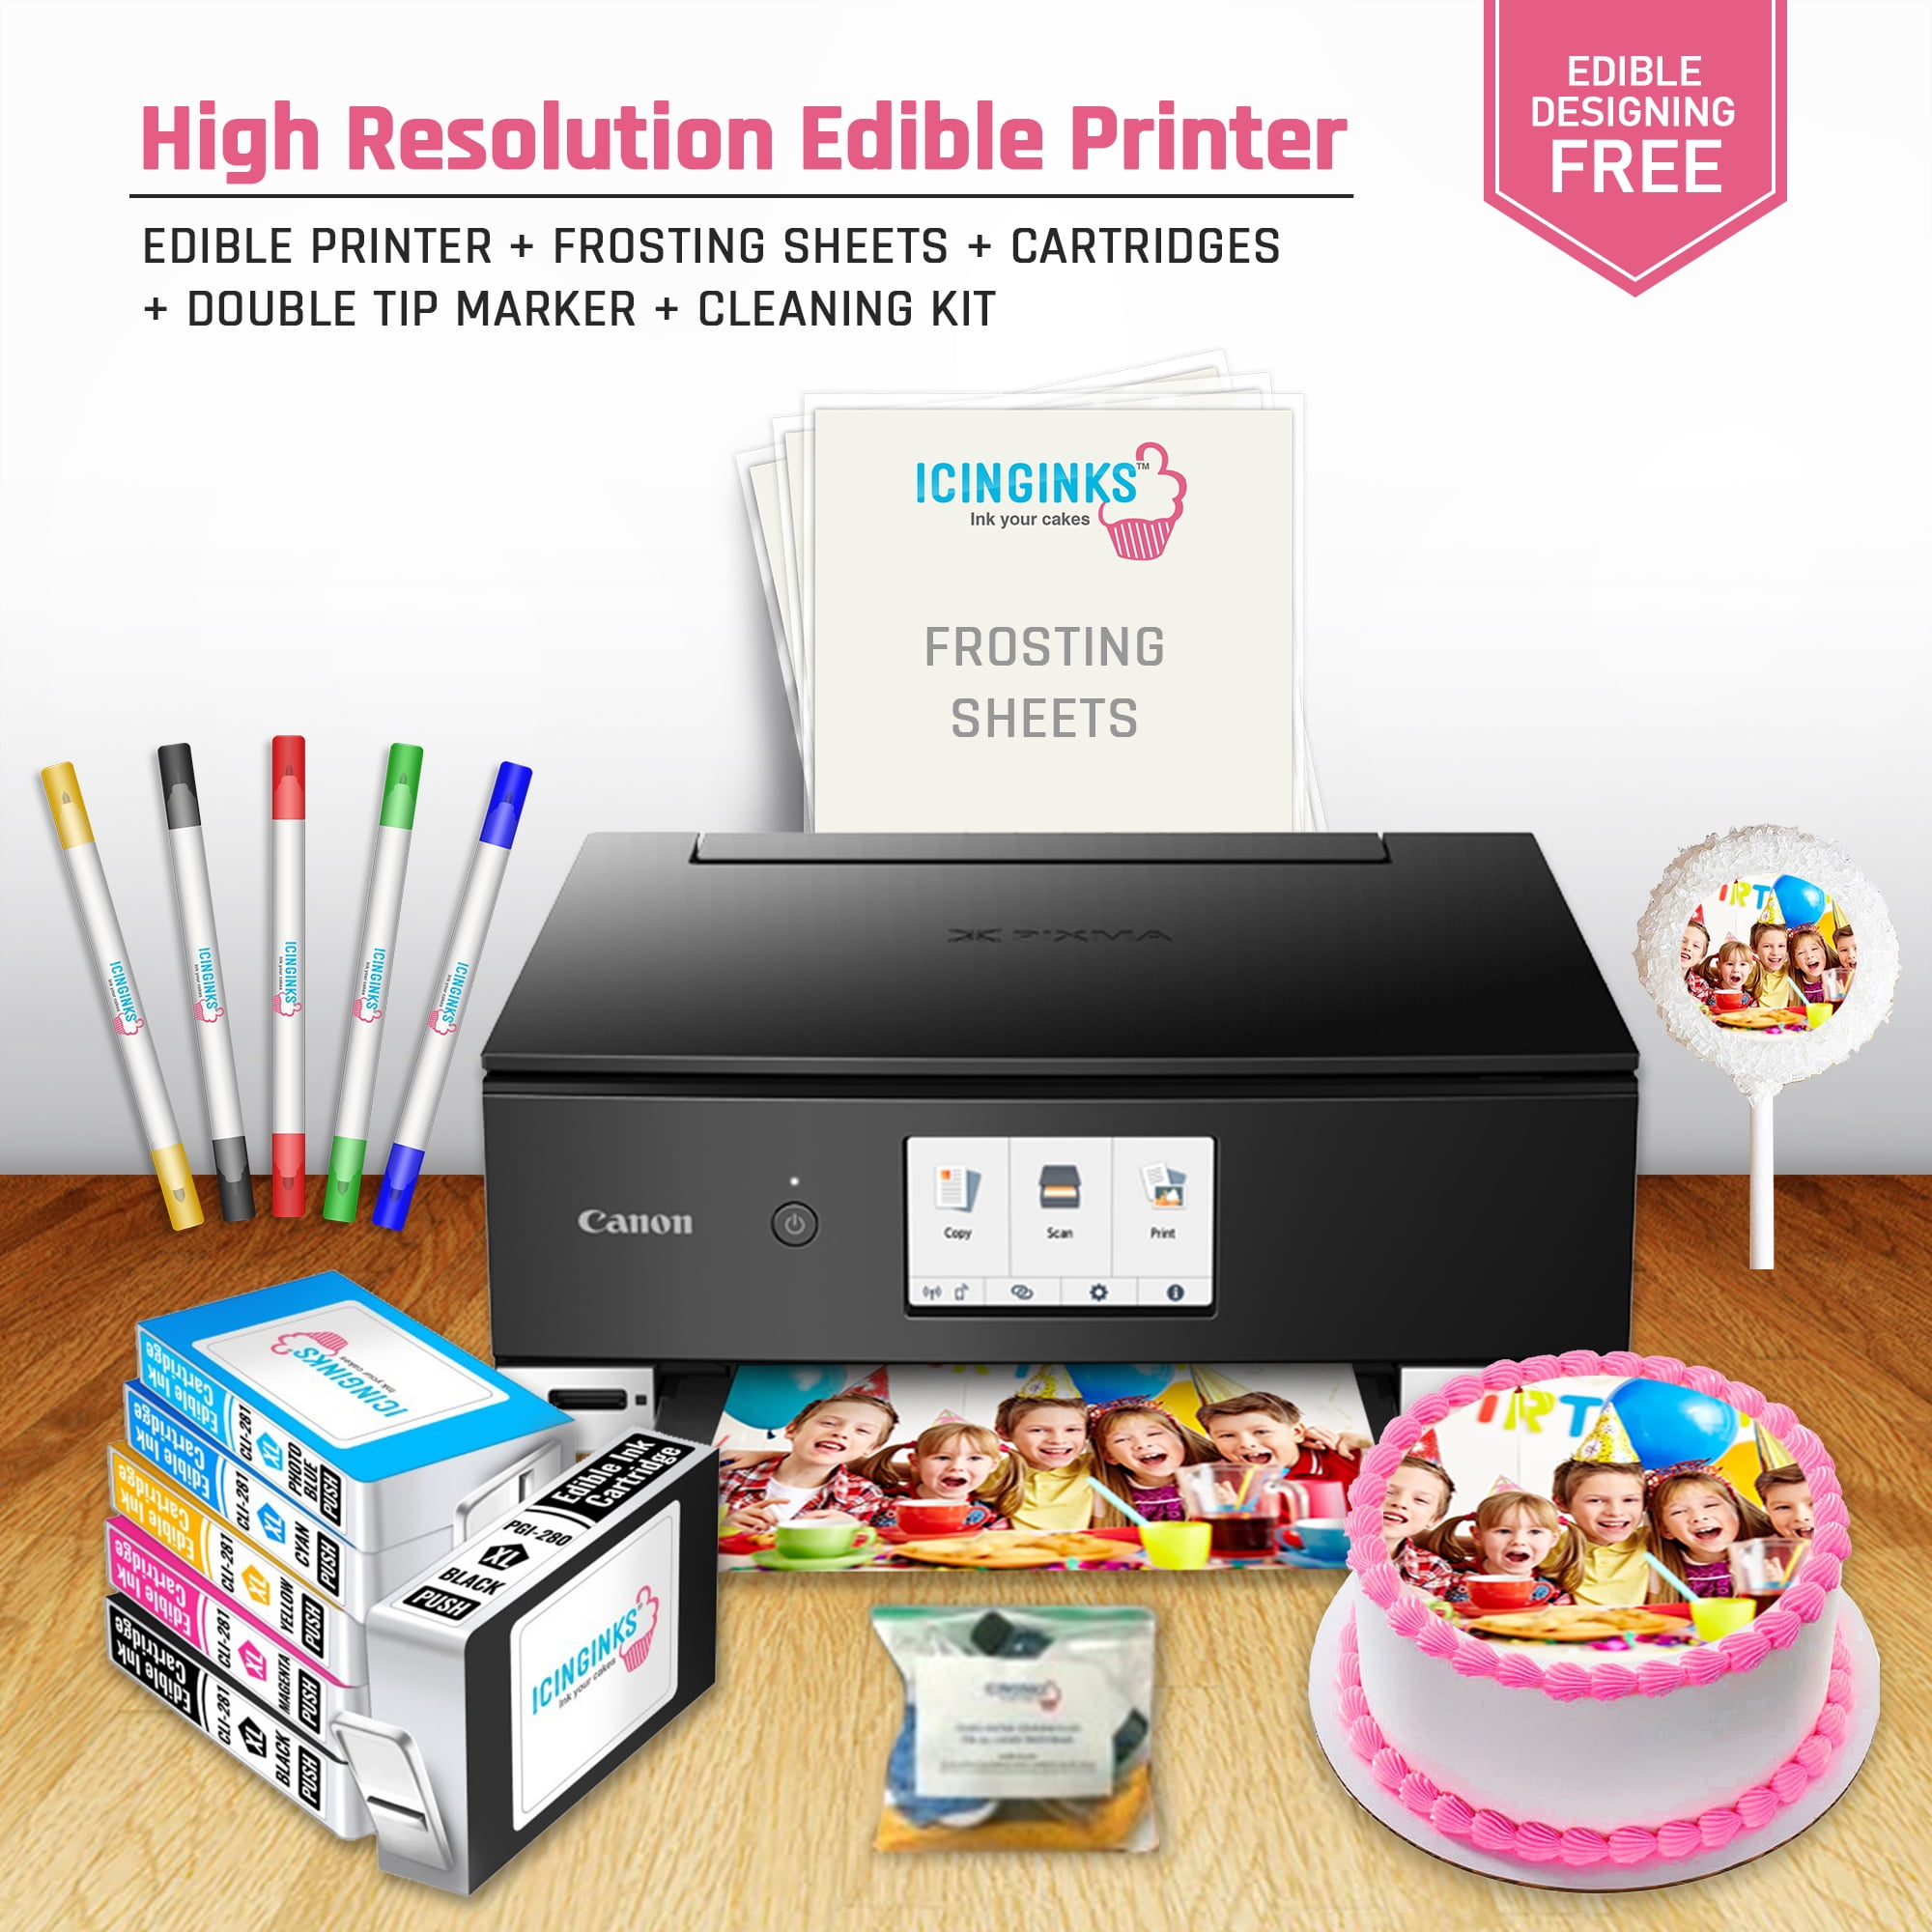 Componeren Mannelijkheid D.w.z Icinginks High Resolution Edible Printer Bundle System for Canon Pixma  TS8320 (Wireless+Scanner) Comes with Edible Cartridges, Frosting sheets,  Edible Markers, Cleaning Kit - Walmart.com